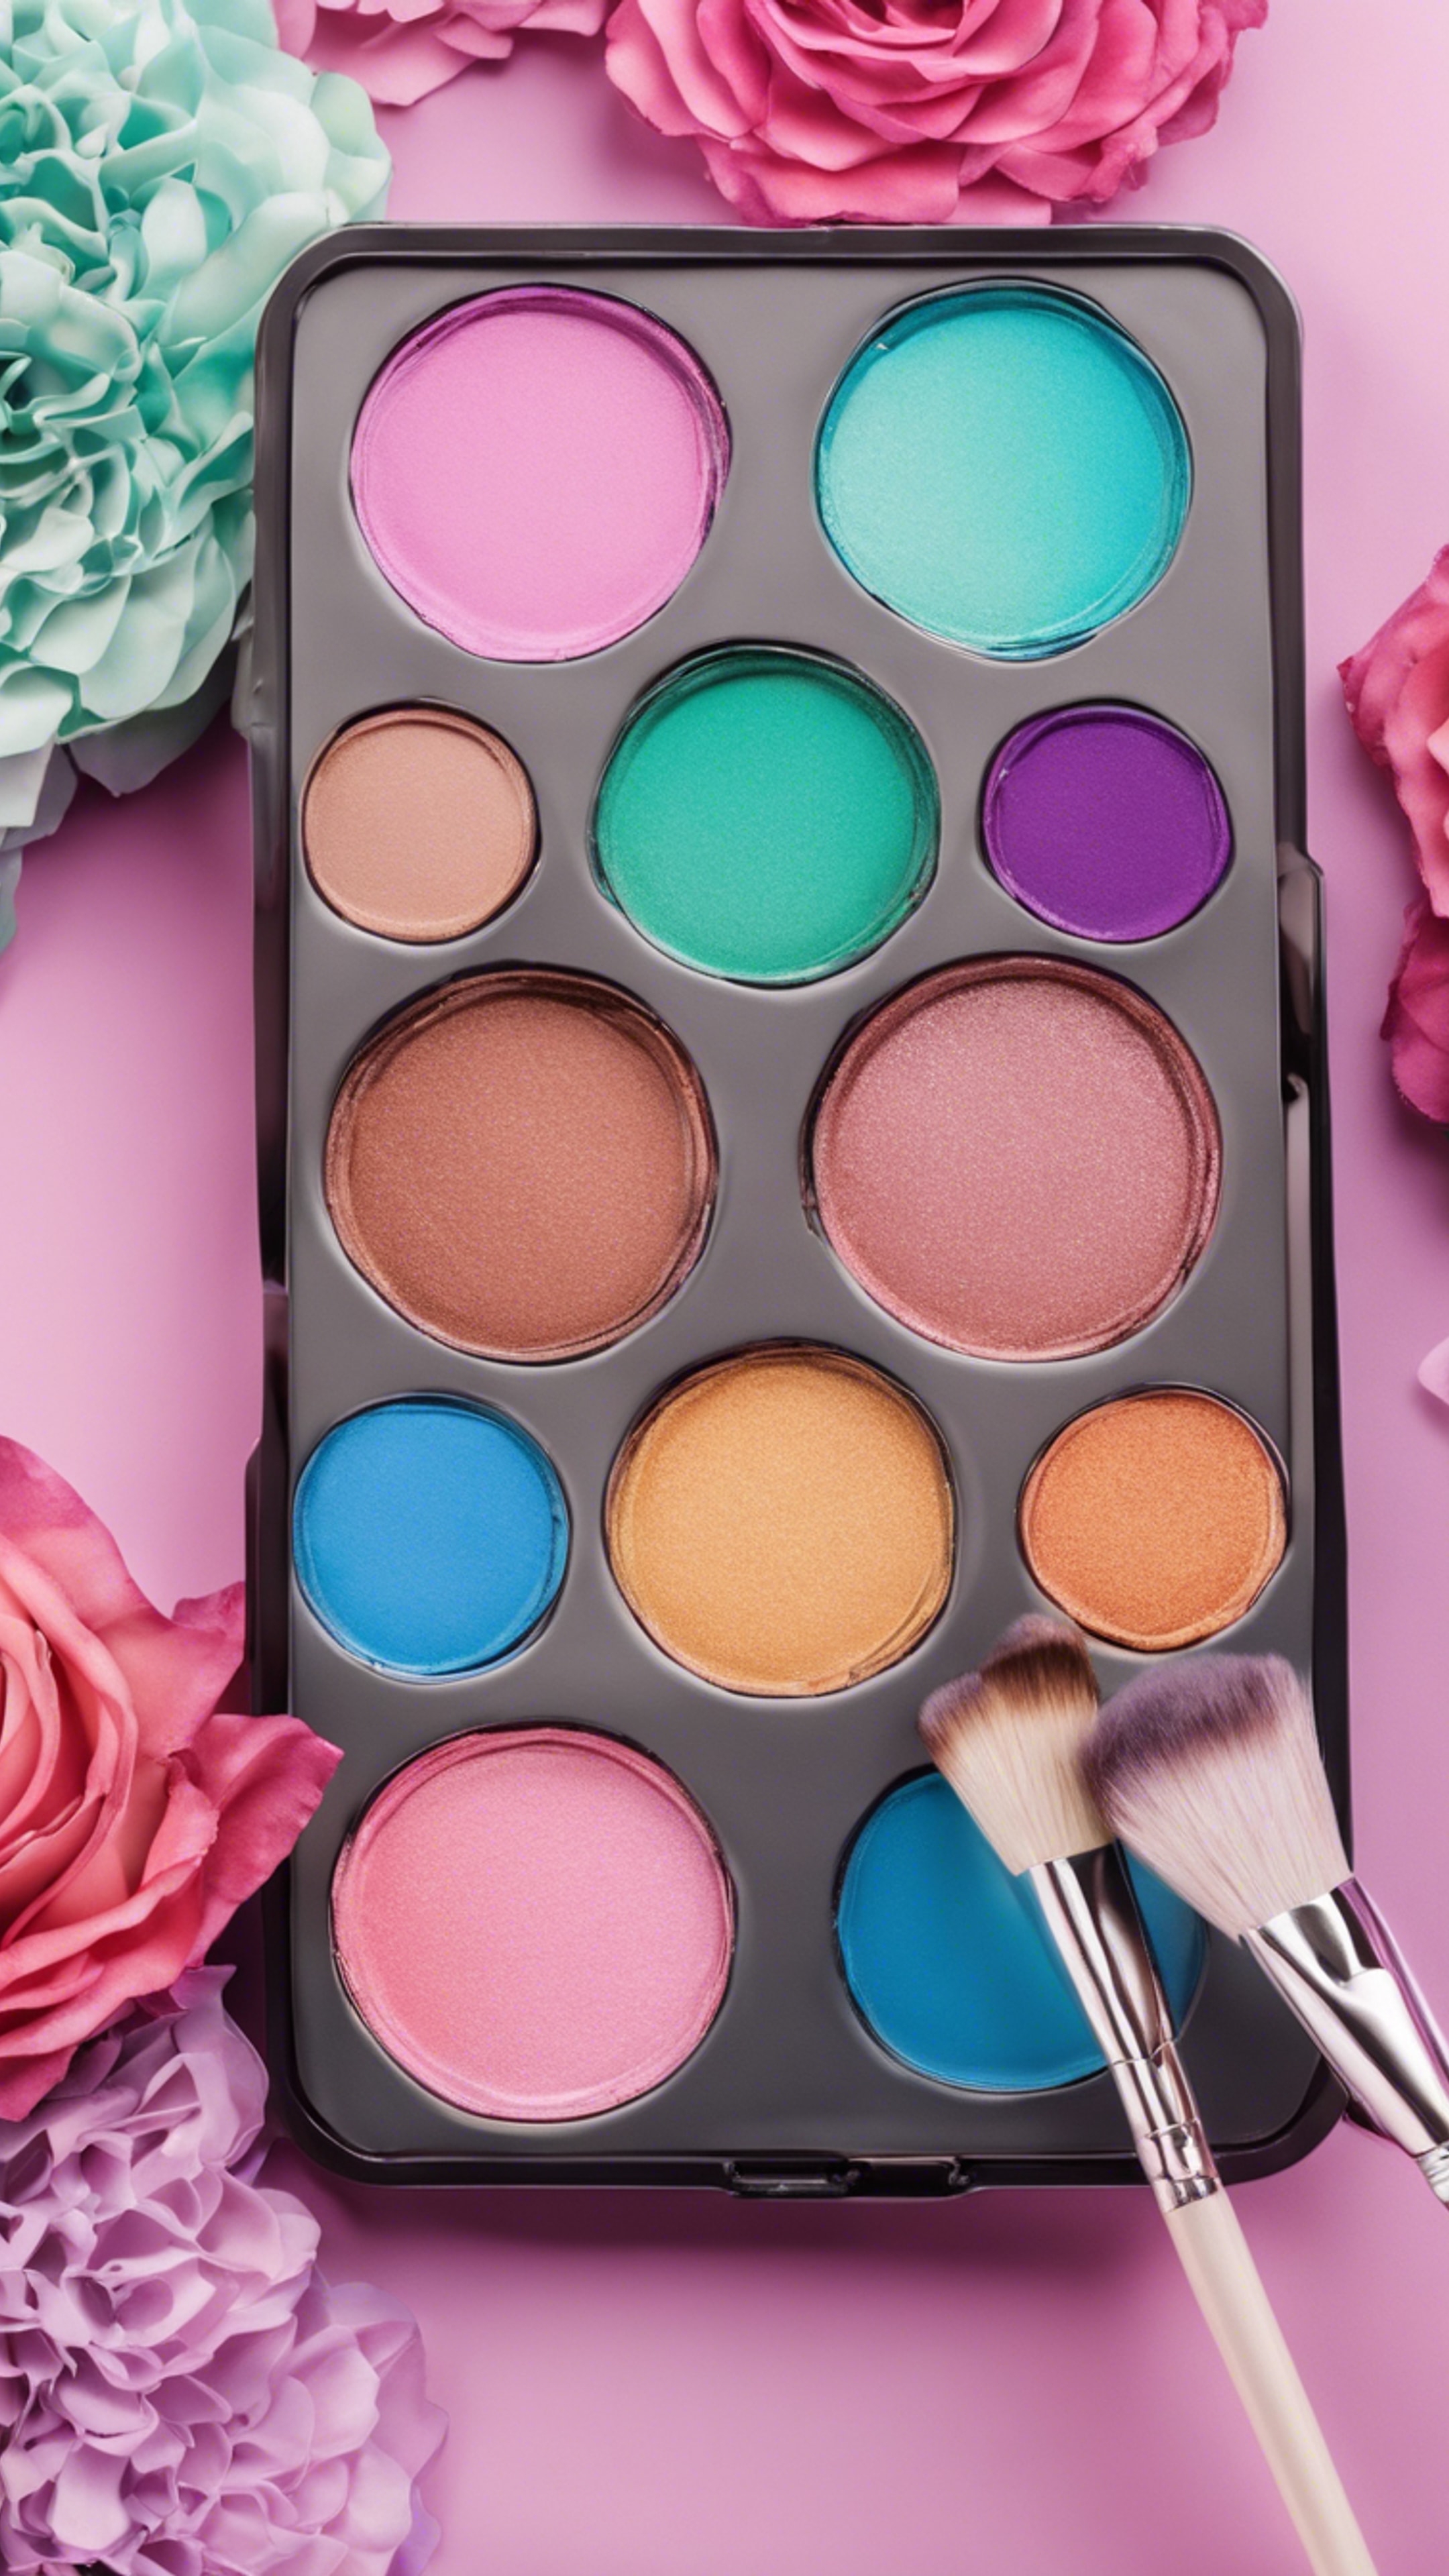 A cute girly makeup palette with a variety of vibrant colors and a brush for application. Tapet[6f3ccf3758d549978770]